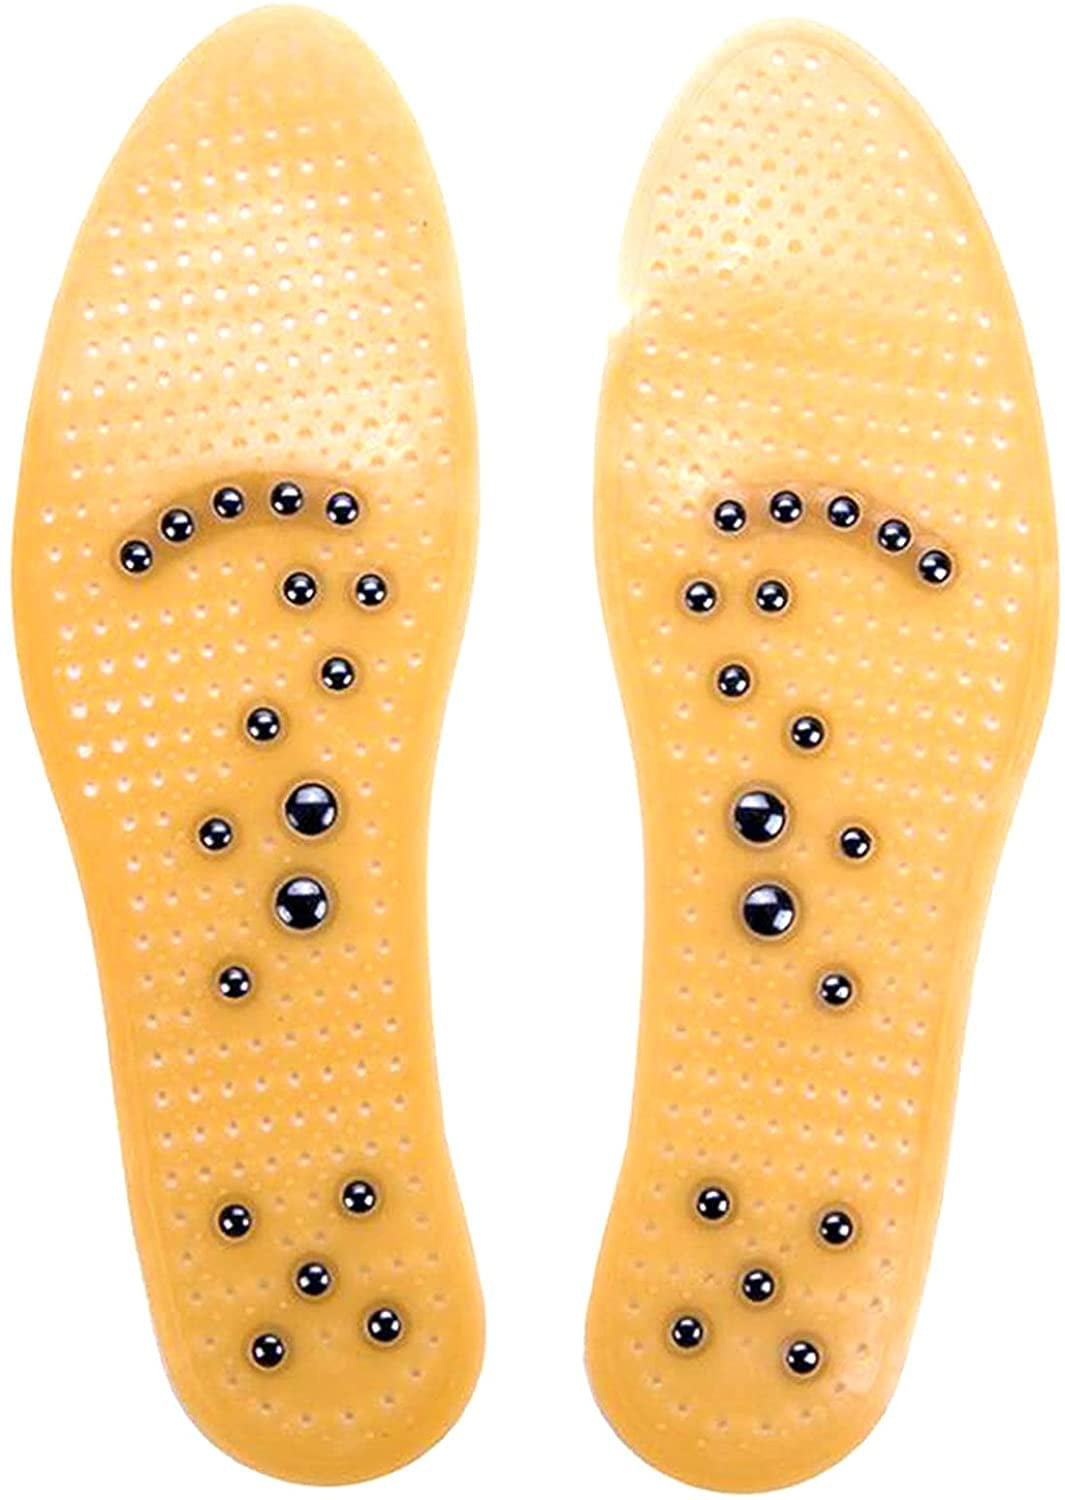 Acupressure Slimming Insoles Foot Massager Magnetic Therapy Weight Loss 1Pair Ou 